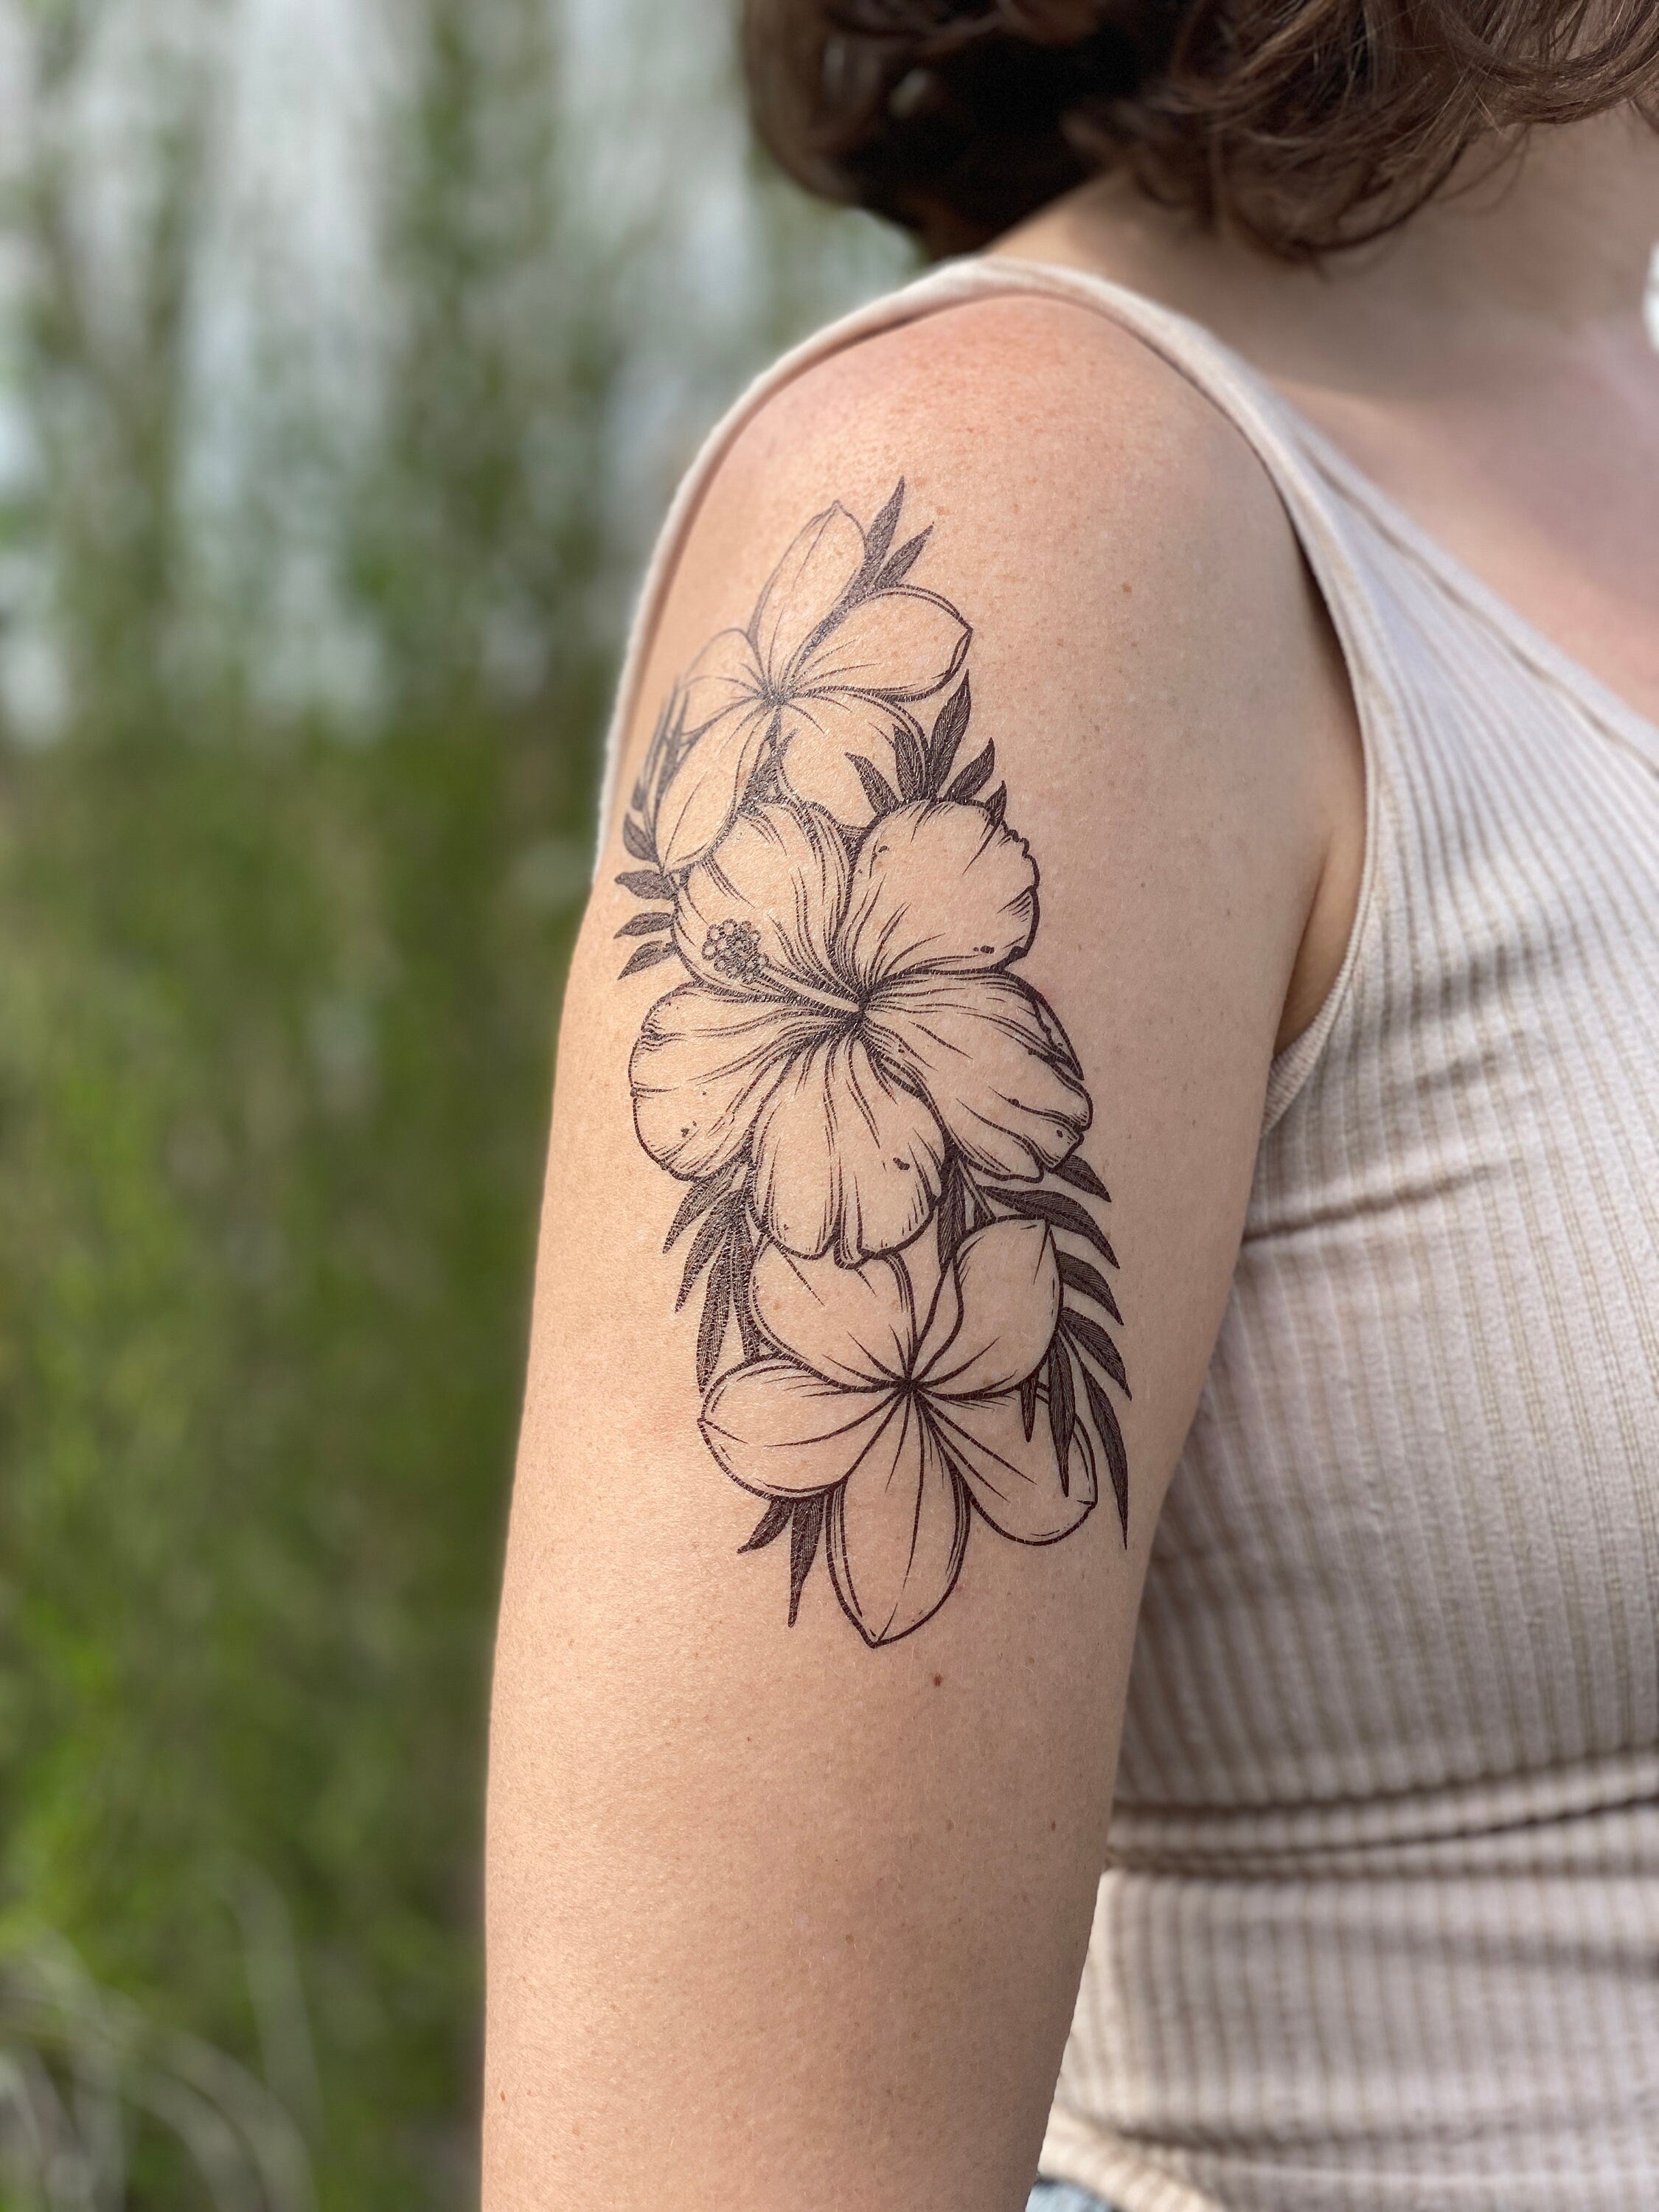 20 Best Hibiscus Tattoo Designs to Inspire You | Hibiscus tattoo, Hibiscus  flower tattoos, Tattoos for women